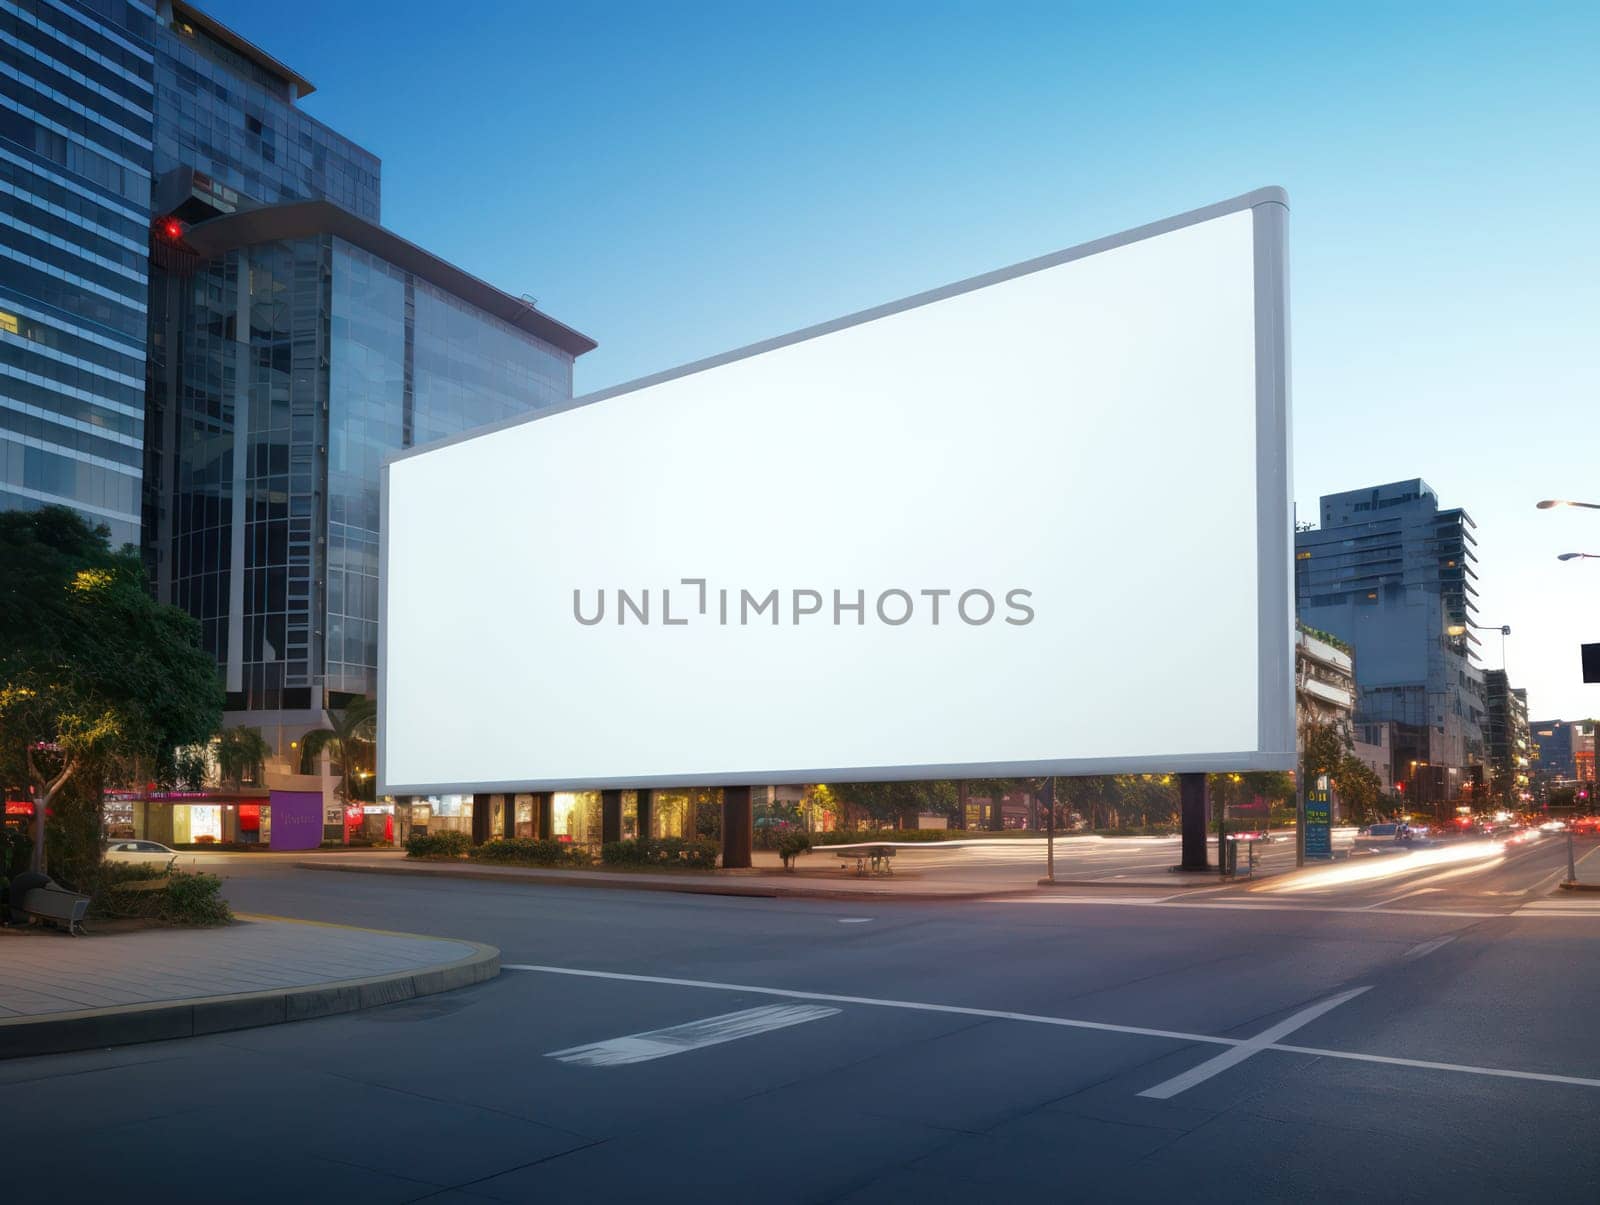 Blank Billboard Advertising in City with Skyline Background